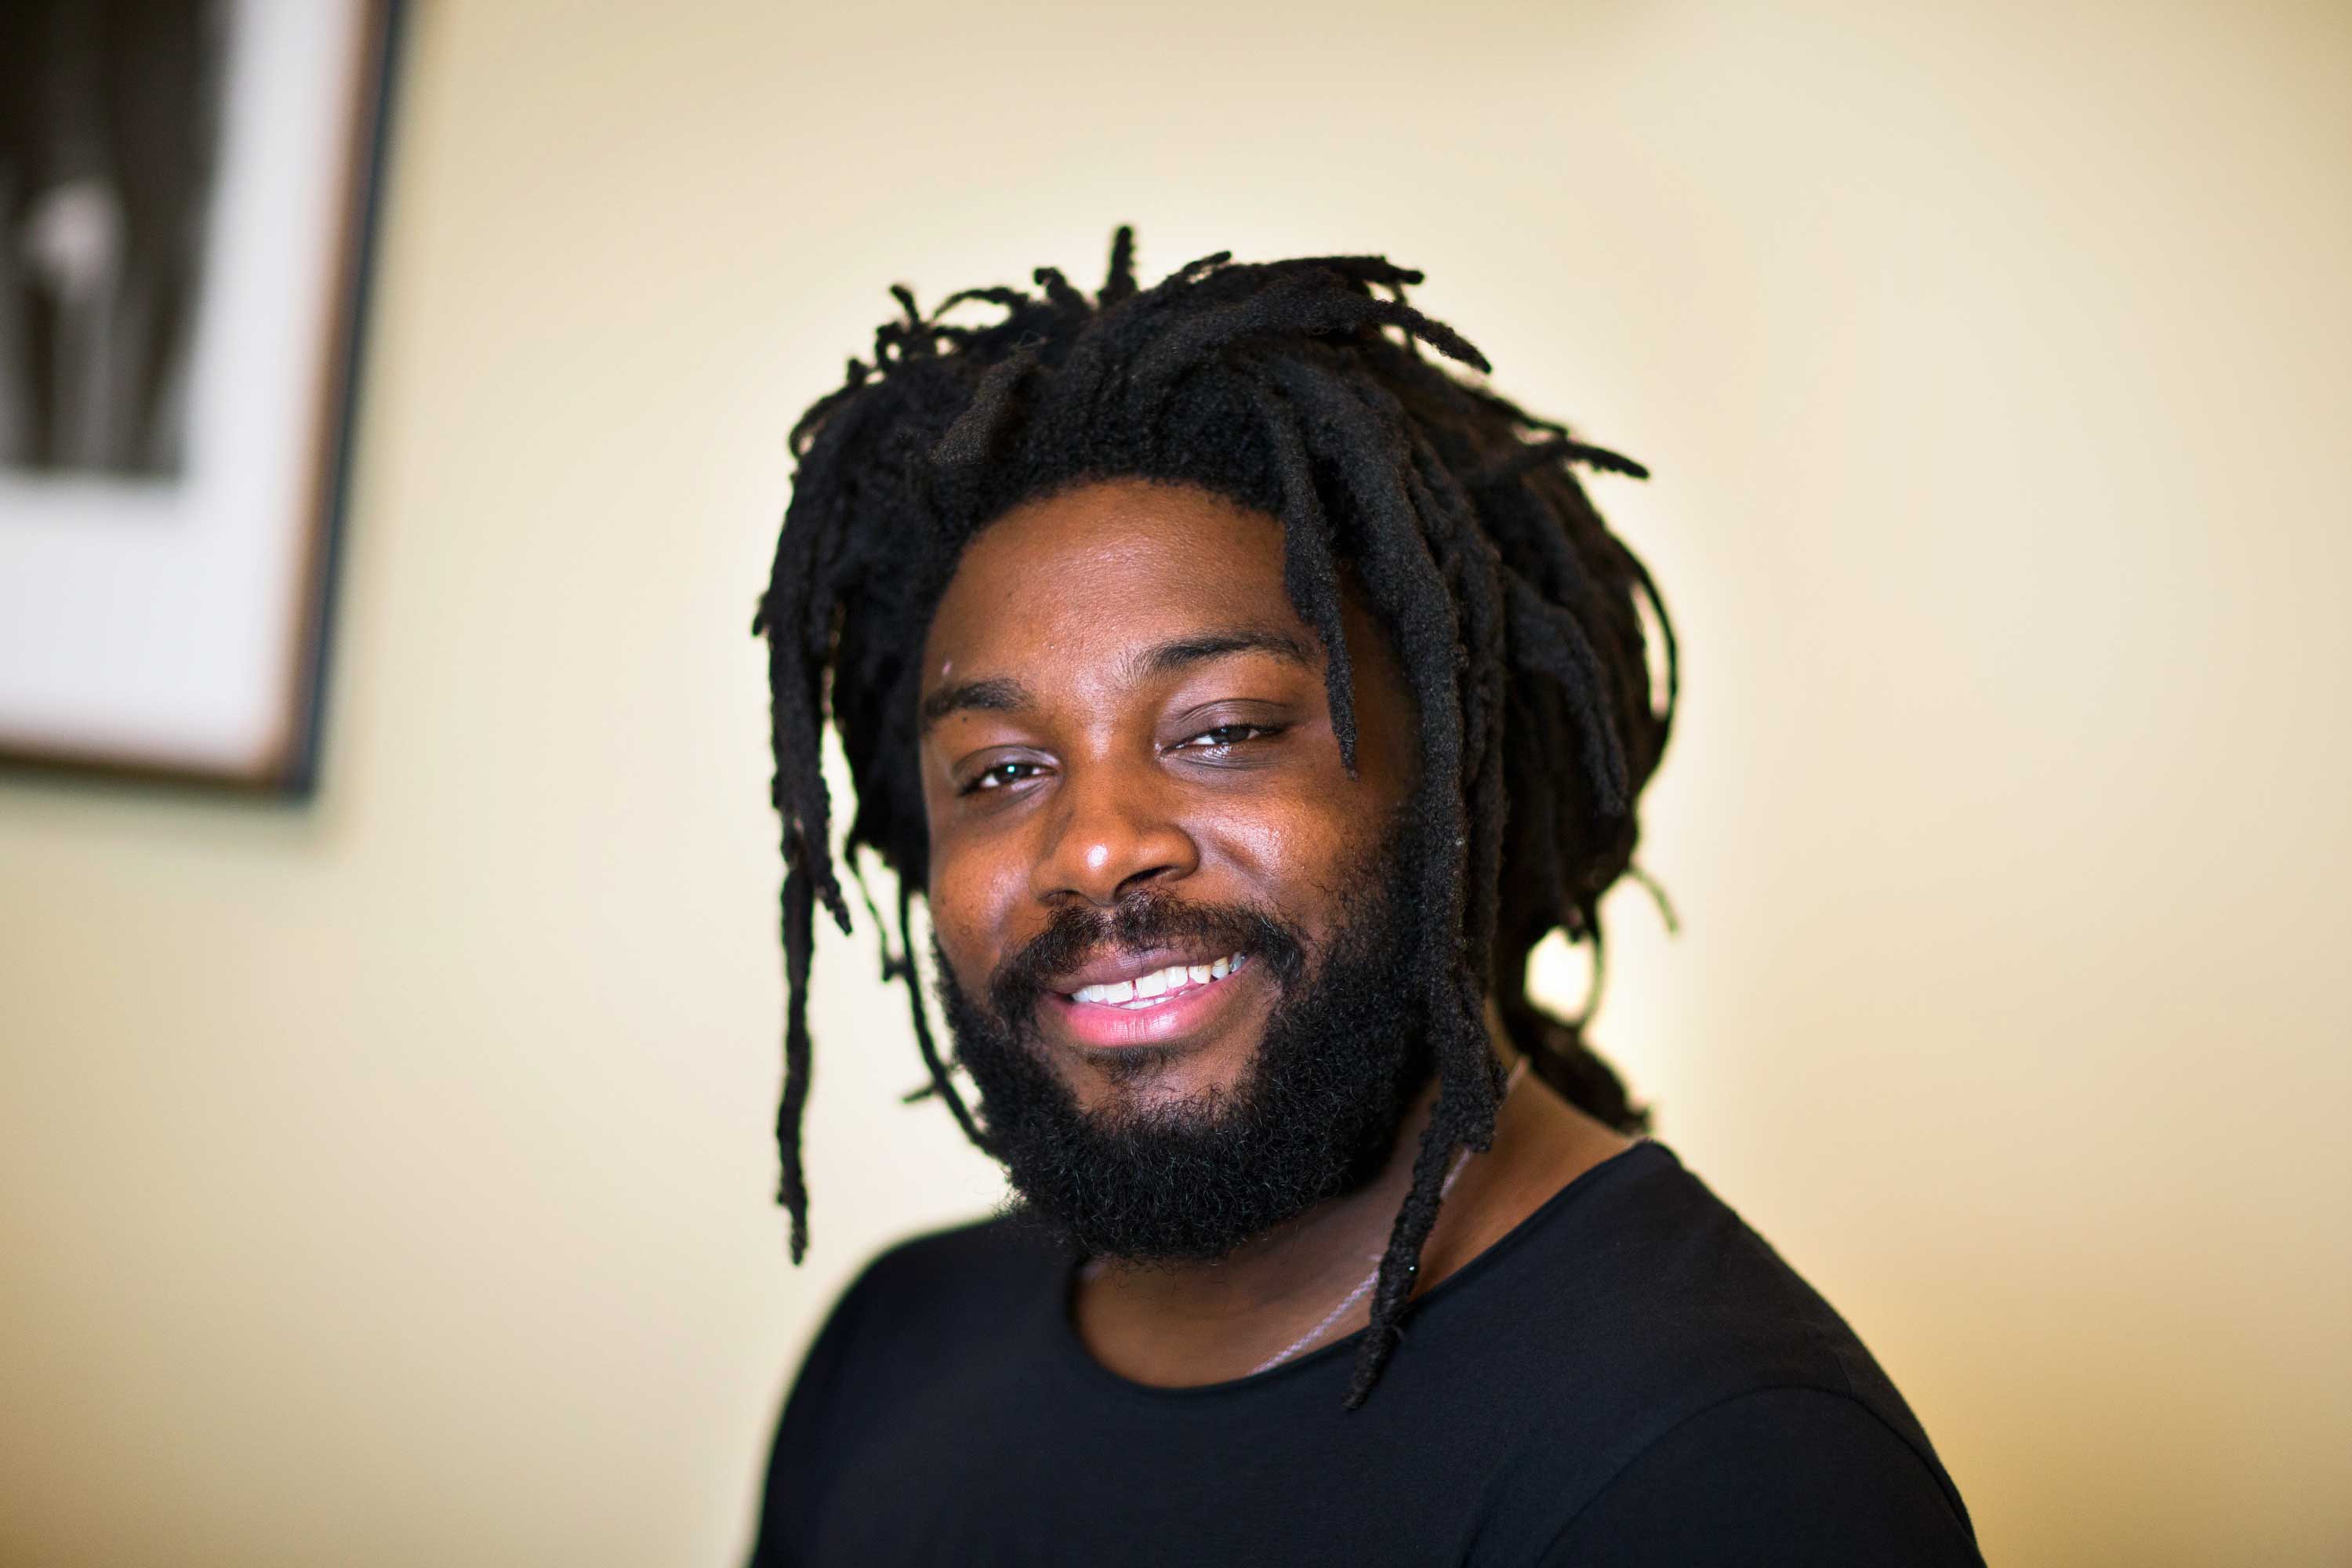 jason-reynolds-as-brave-as-you-author-writer